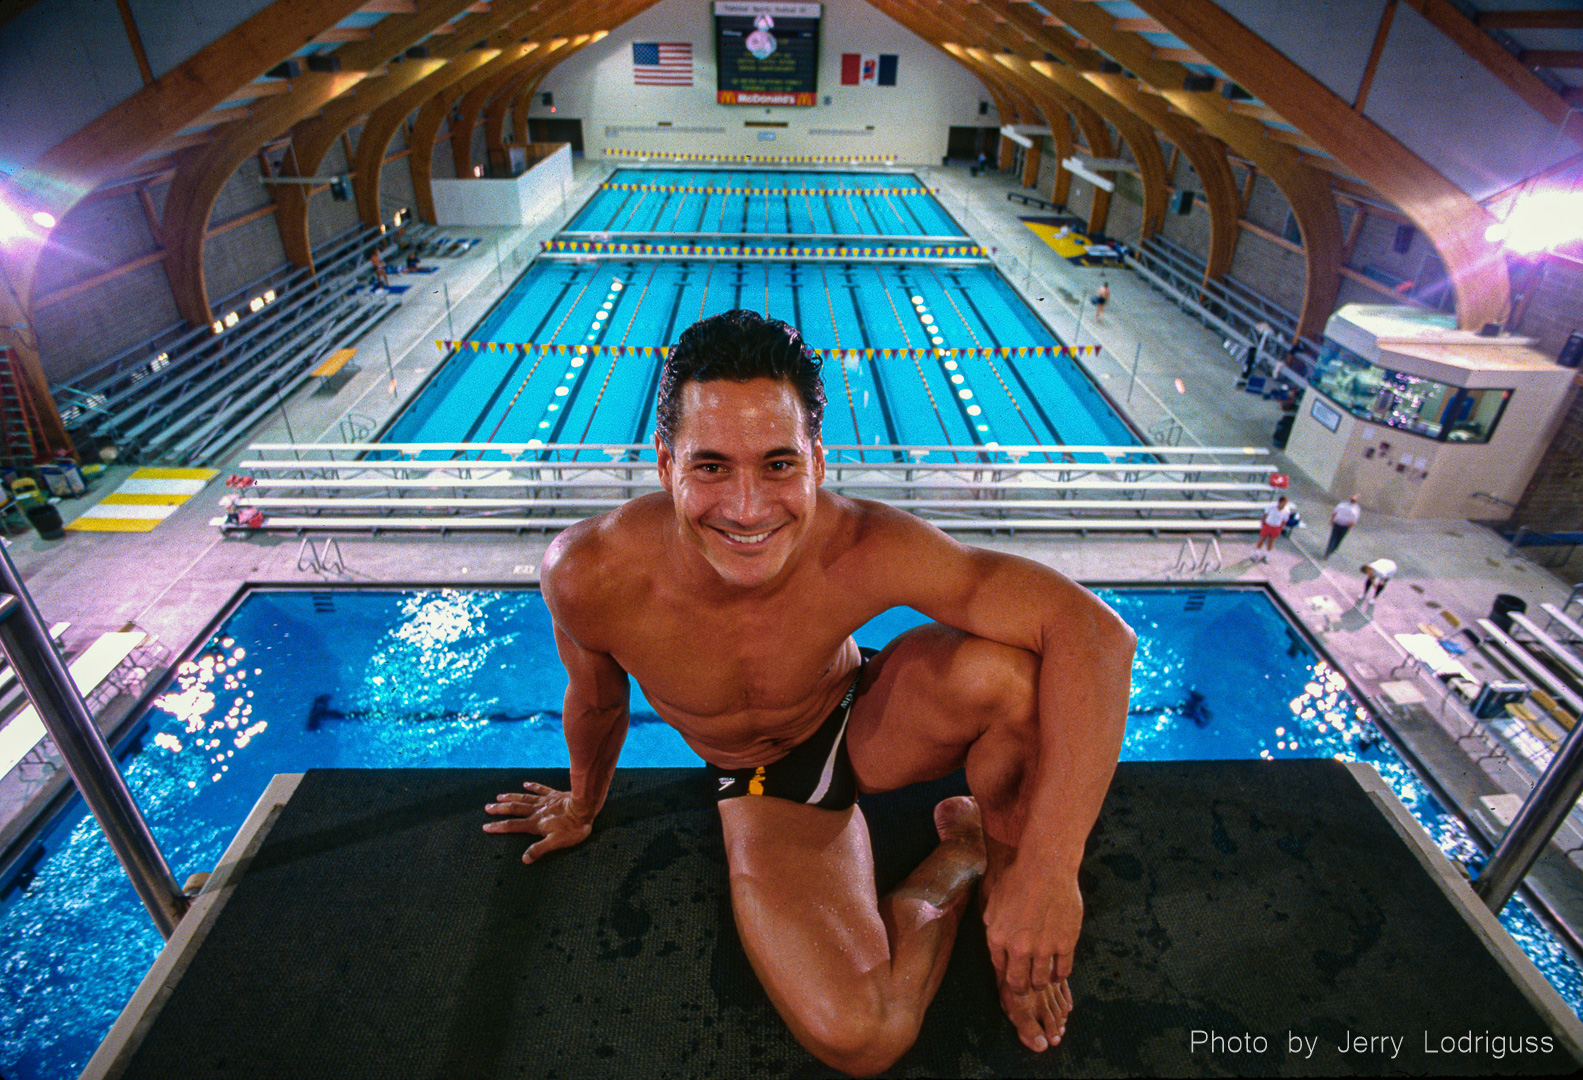 Greg Louganis, Olympic champion and holder of 41 national titles, poses for a portrait on top of the 10-meter diving platform during the 1987 United States Diving indoor championships.